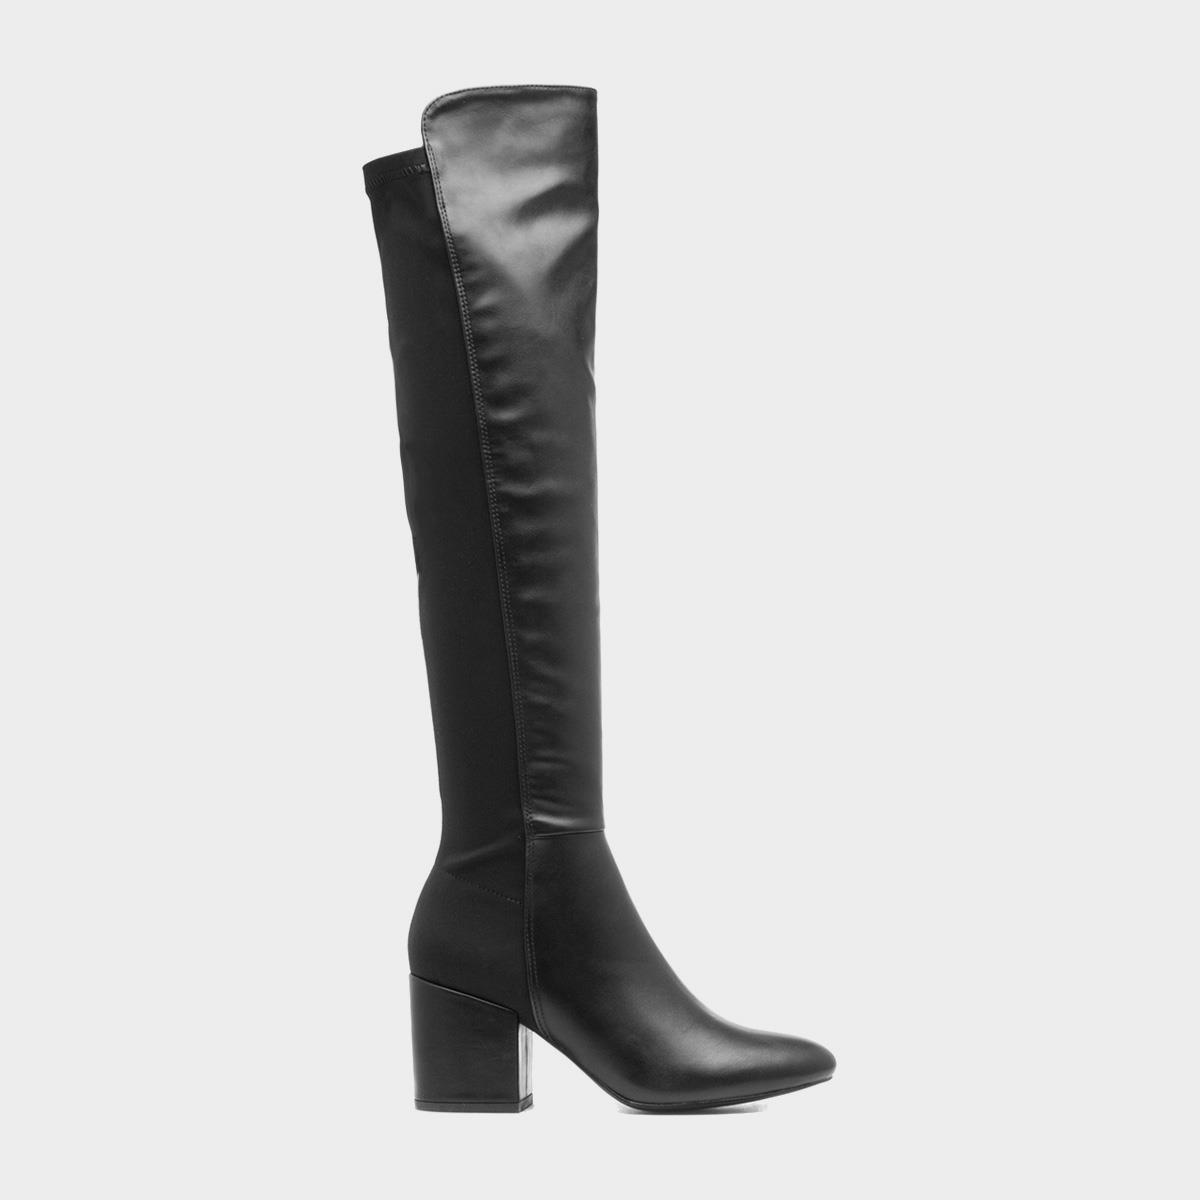 Lilley Womens Black Over The Knee Boot-188039 | Shoe Zone